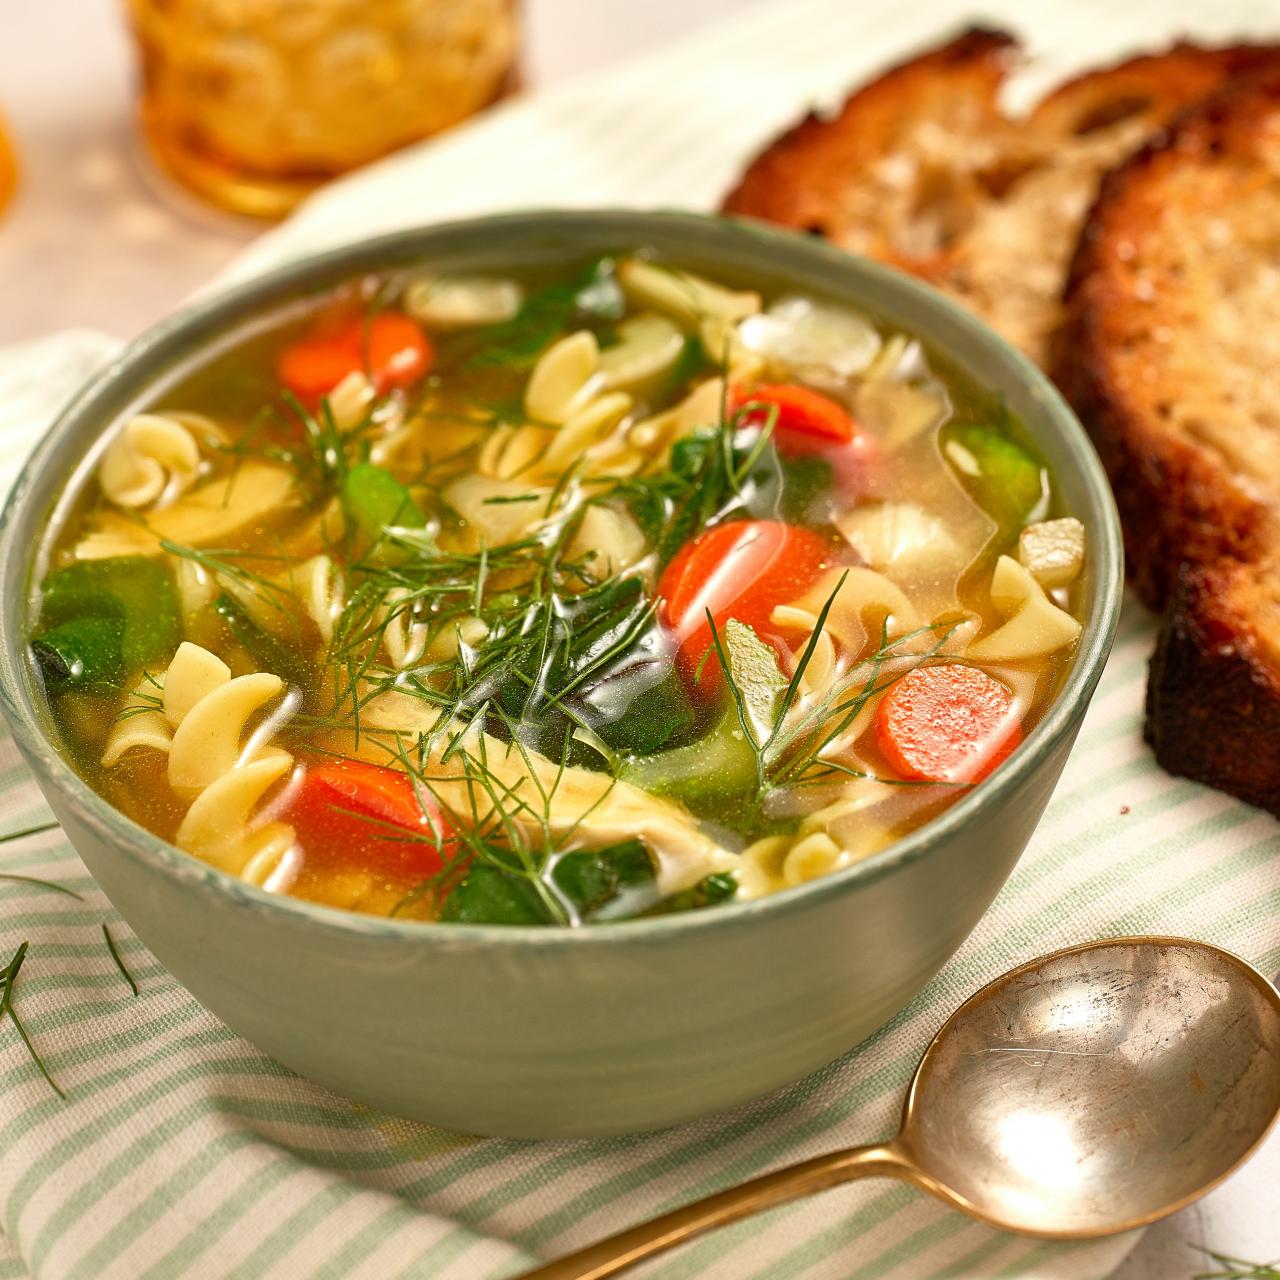 Ultimate Chicken Noodle Soup - The Daring Gourmet